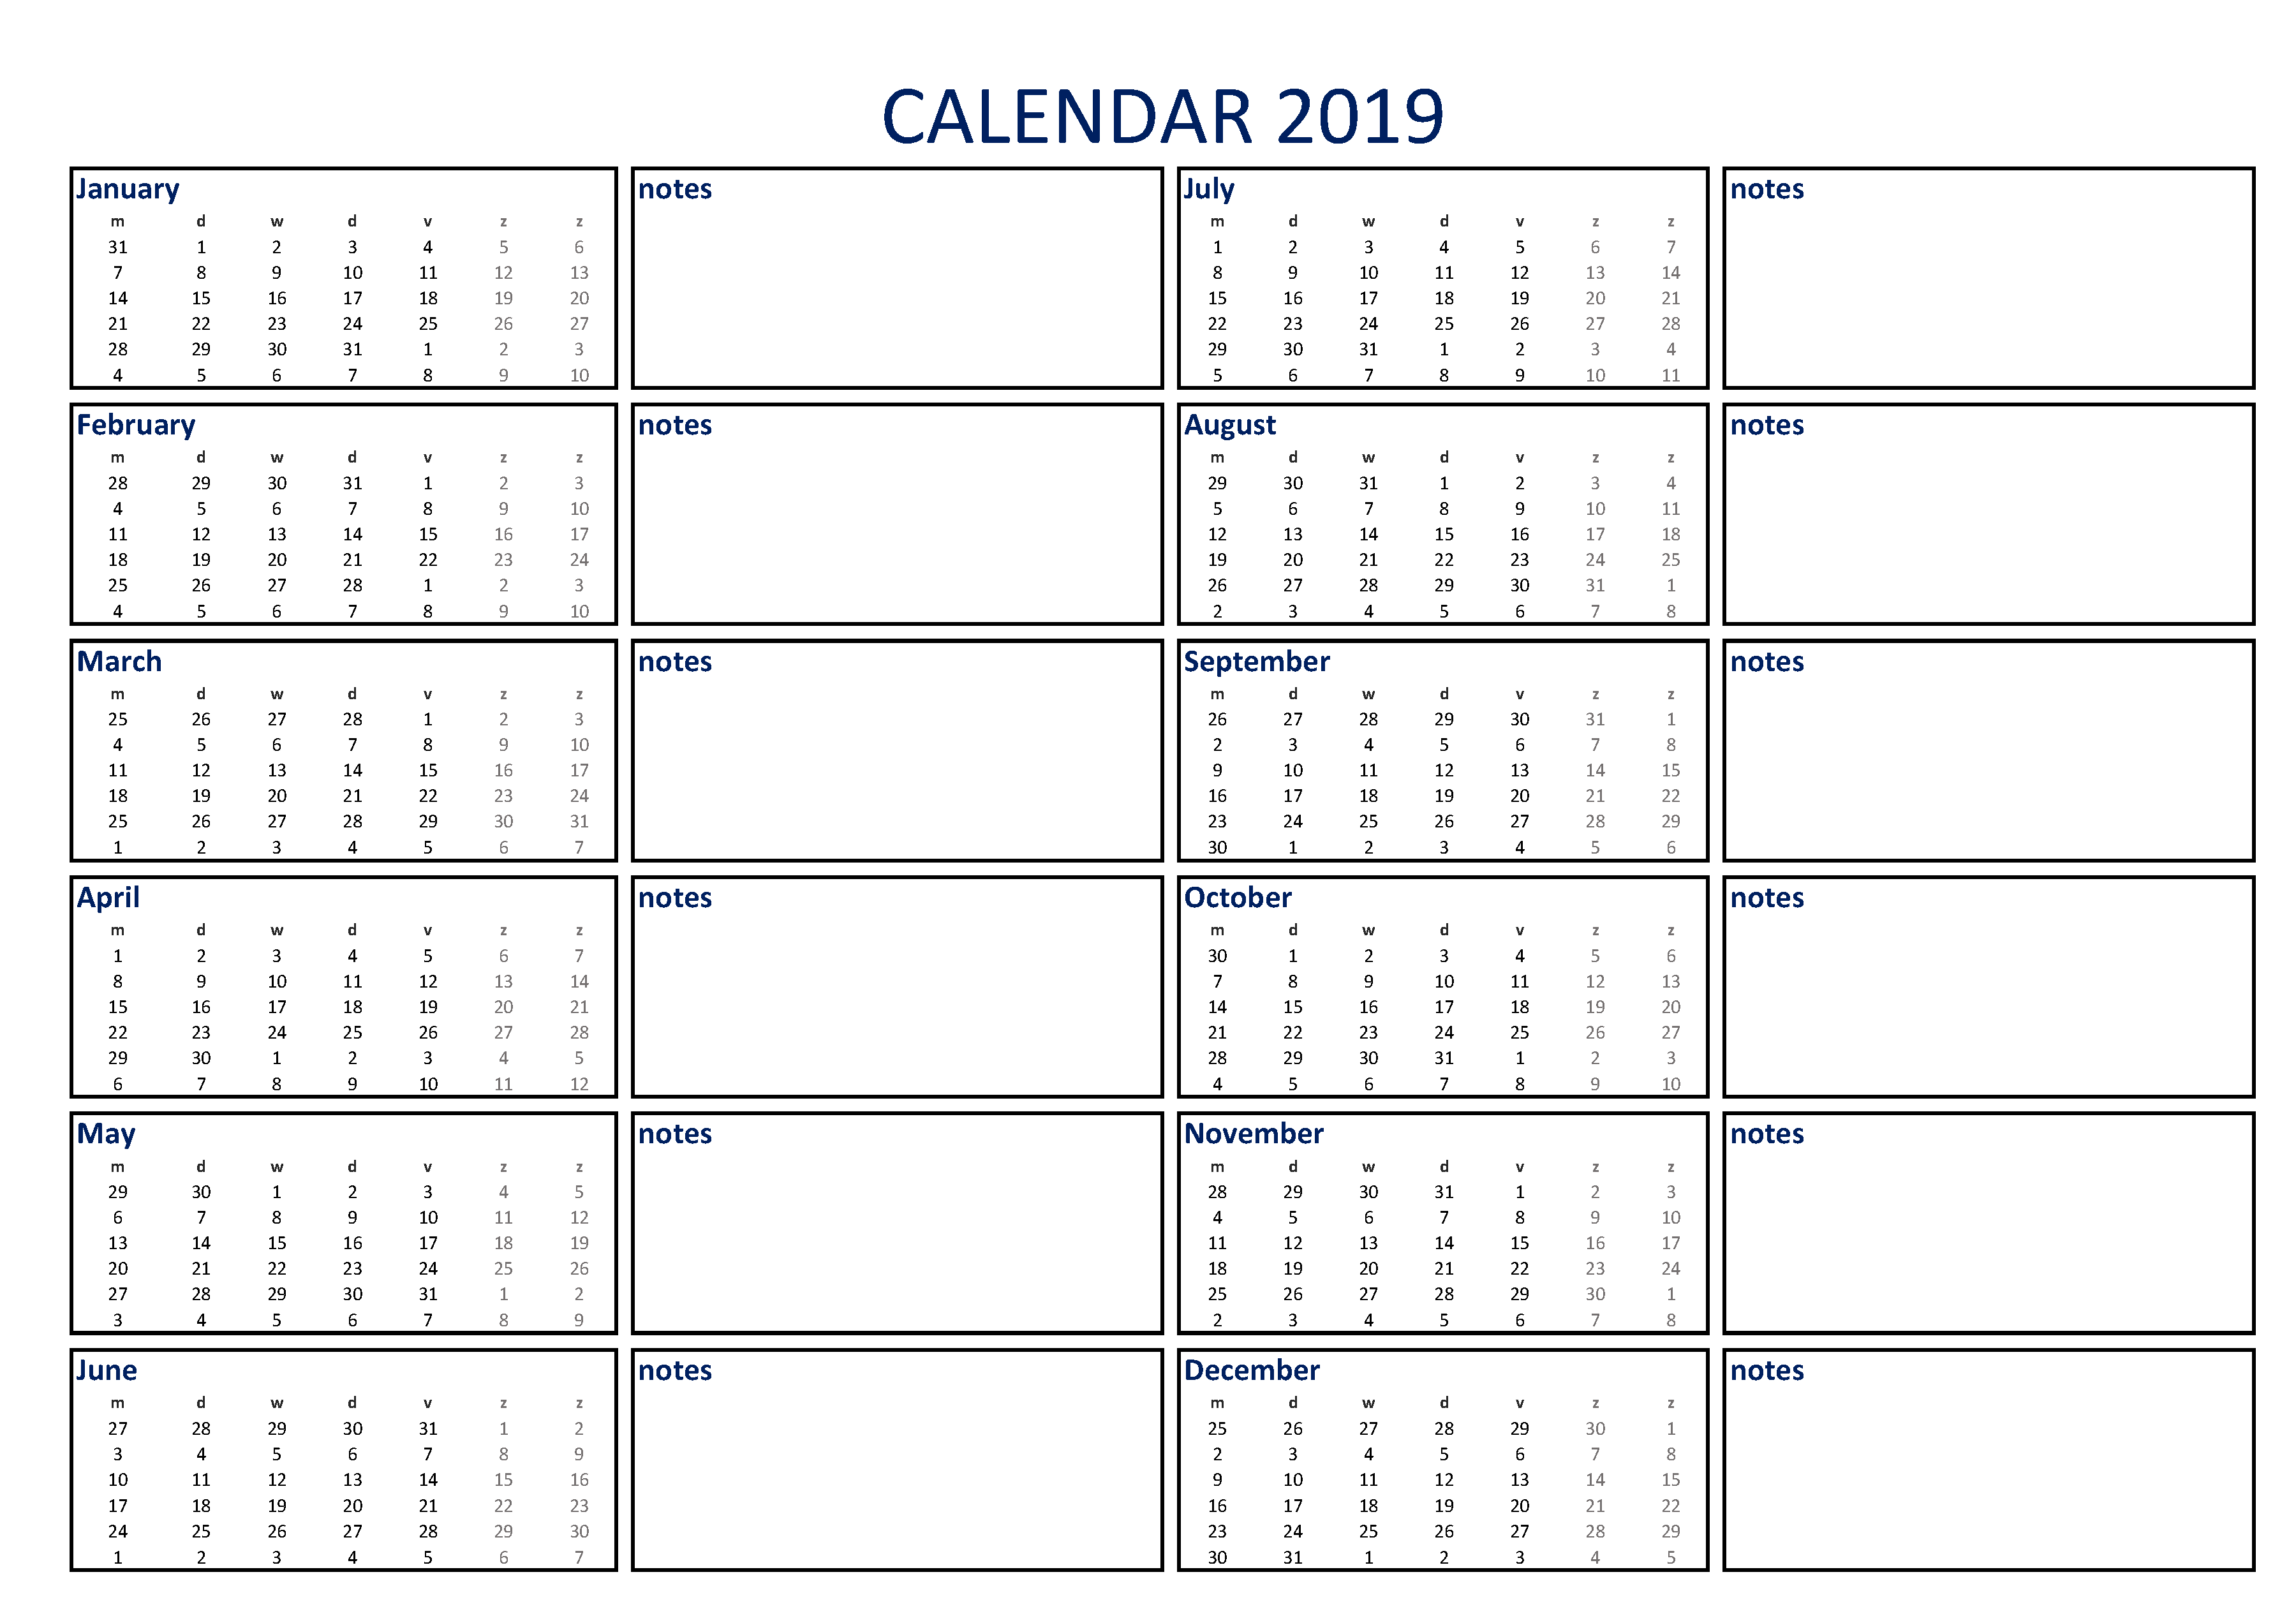 Calendar 2019 with Notes A4 main image